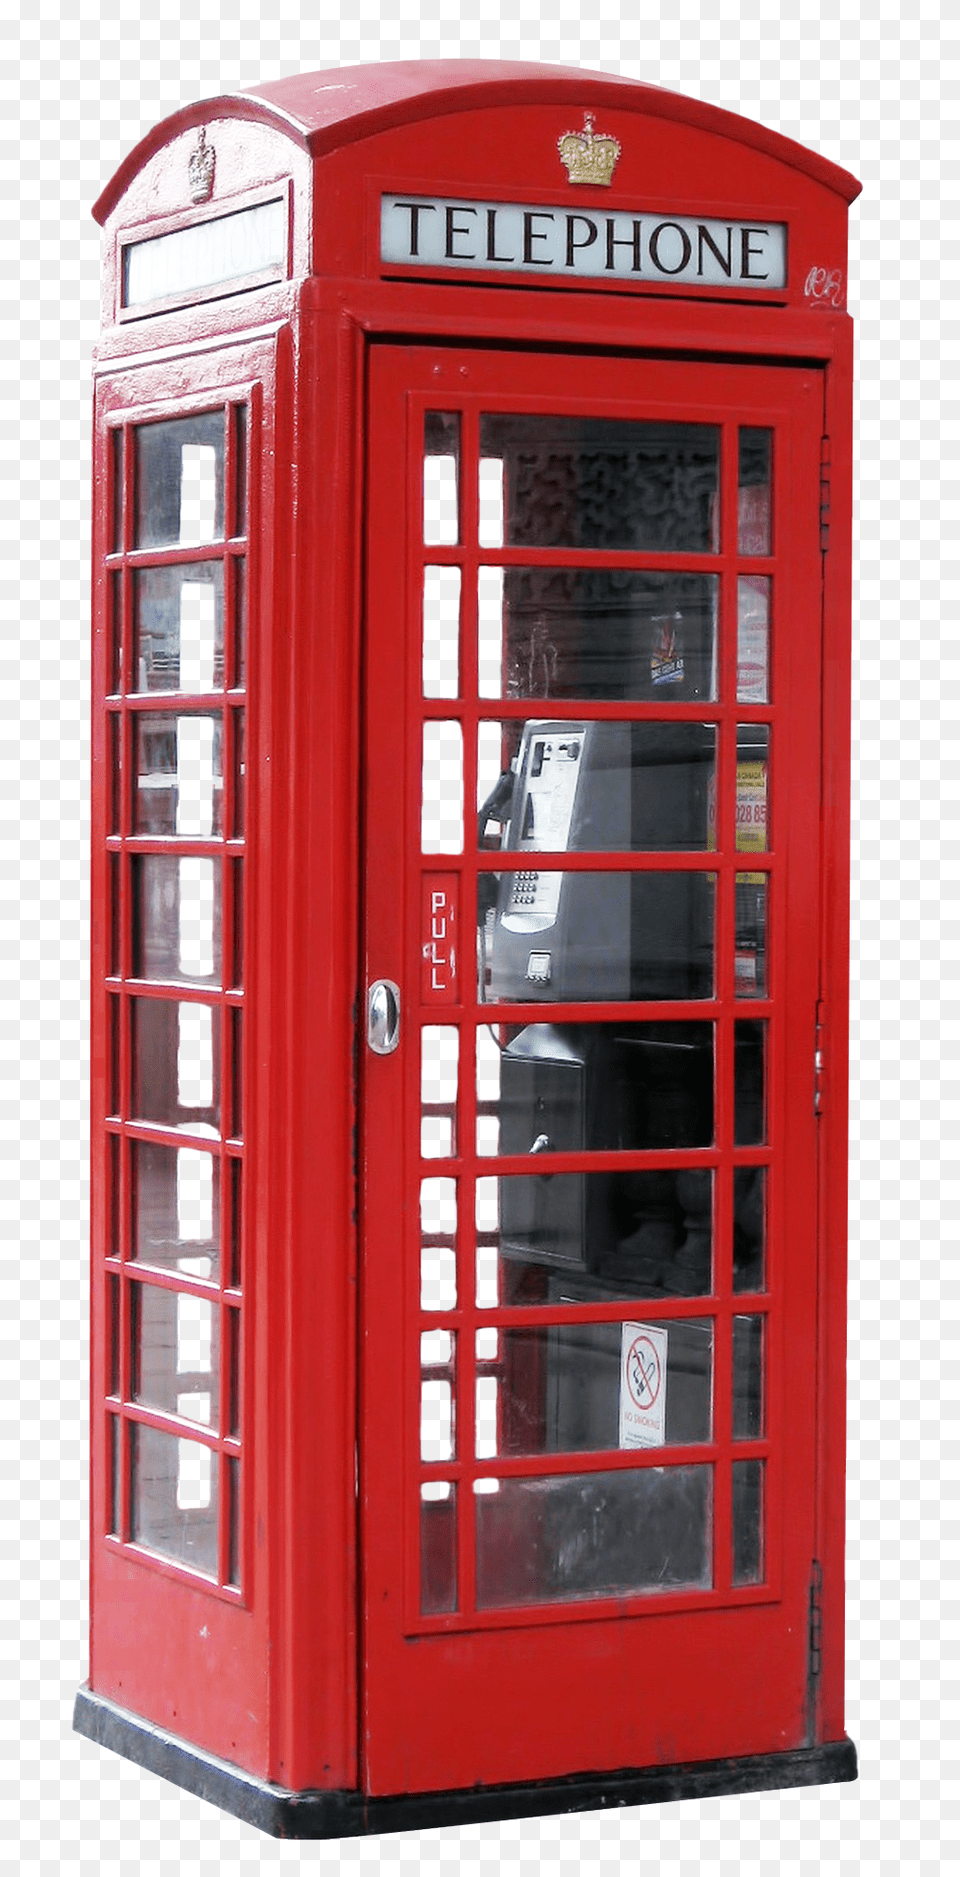 Pngpix Com Telephone Booth Image, Kiosk, Phone Booth Free Transparent Png